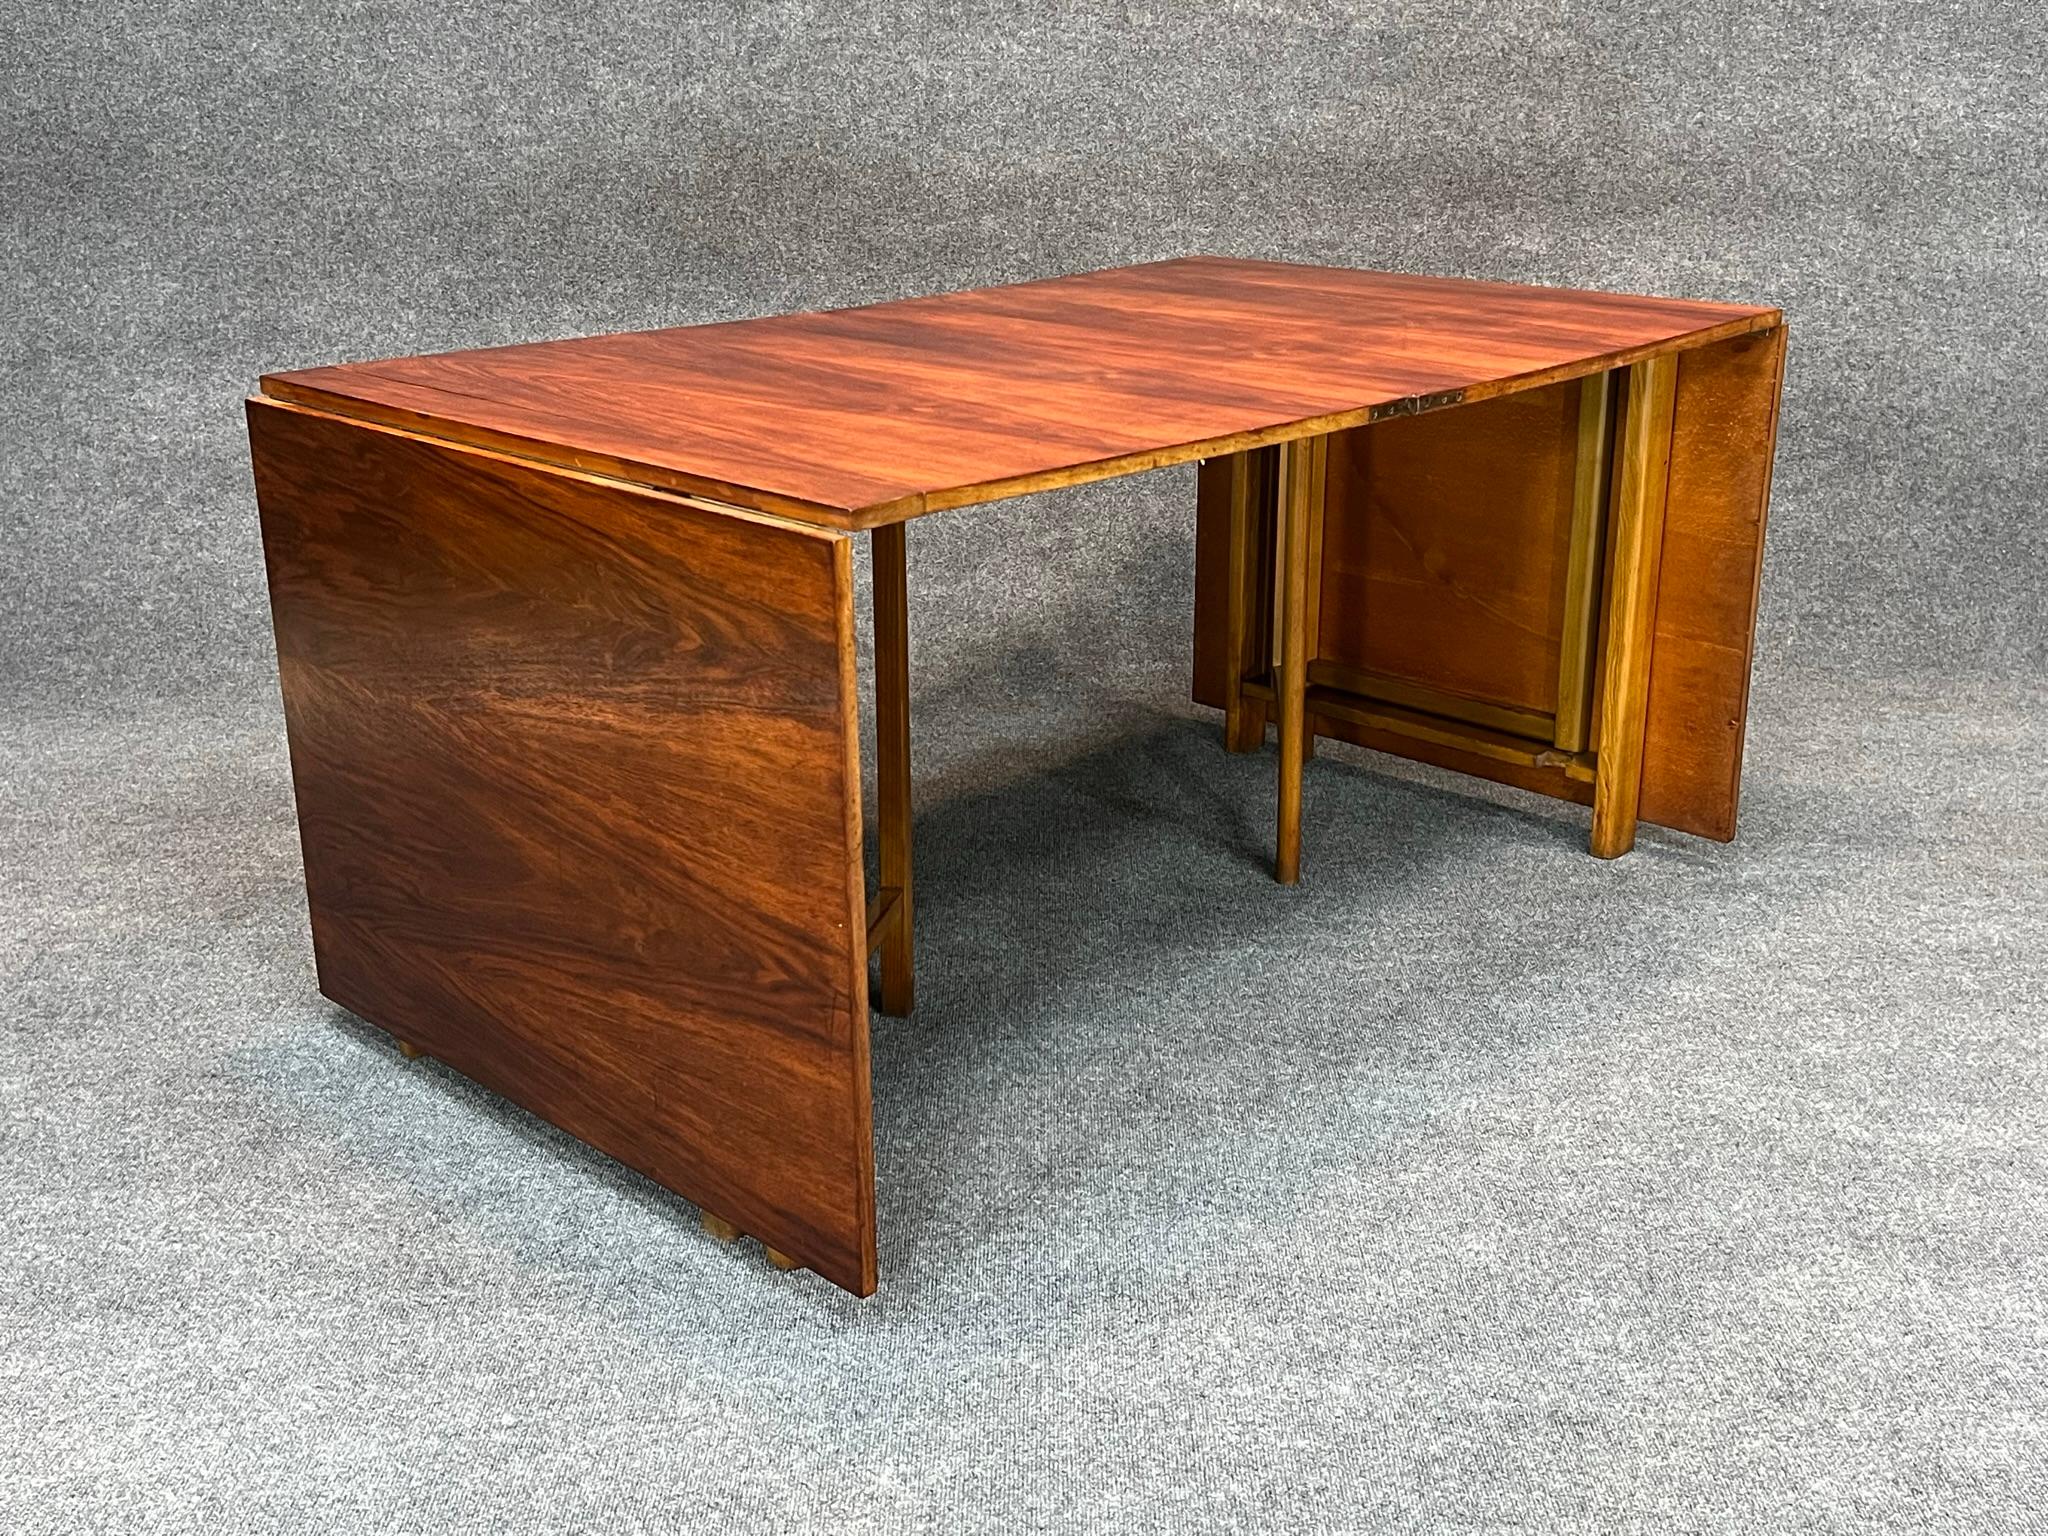 Rosewood Bruno Mathsson Maria folding dining table, Sweden, c. 1936

Rare Mid-Century Modern Bruno Mathsson Maria folding table crated in rosewood and made in Sweden. Amazing cleaver and versatile design that can be configured in numerous